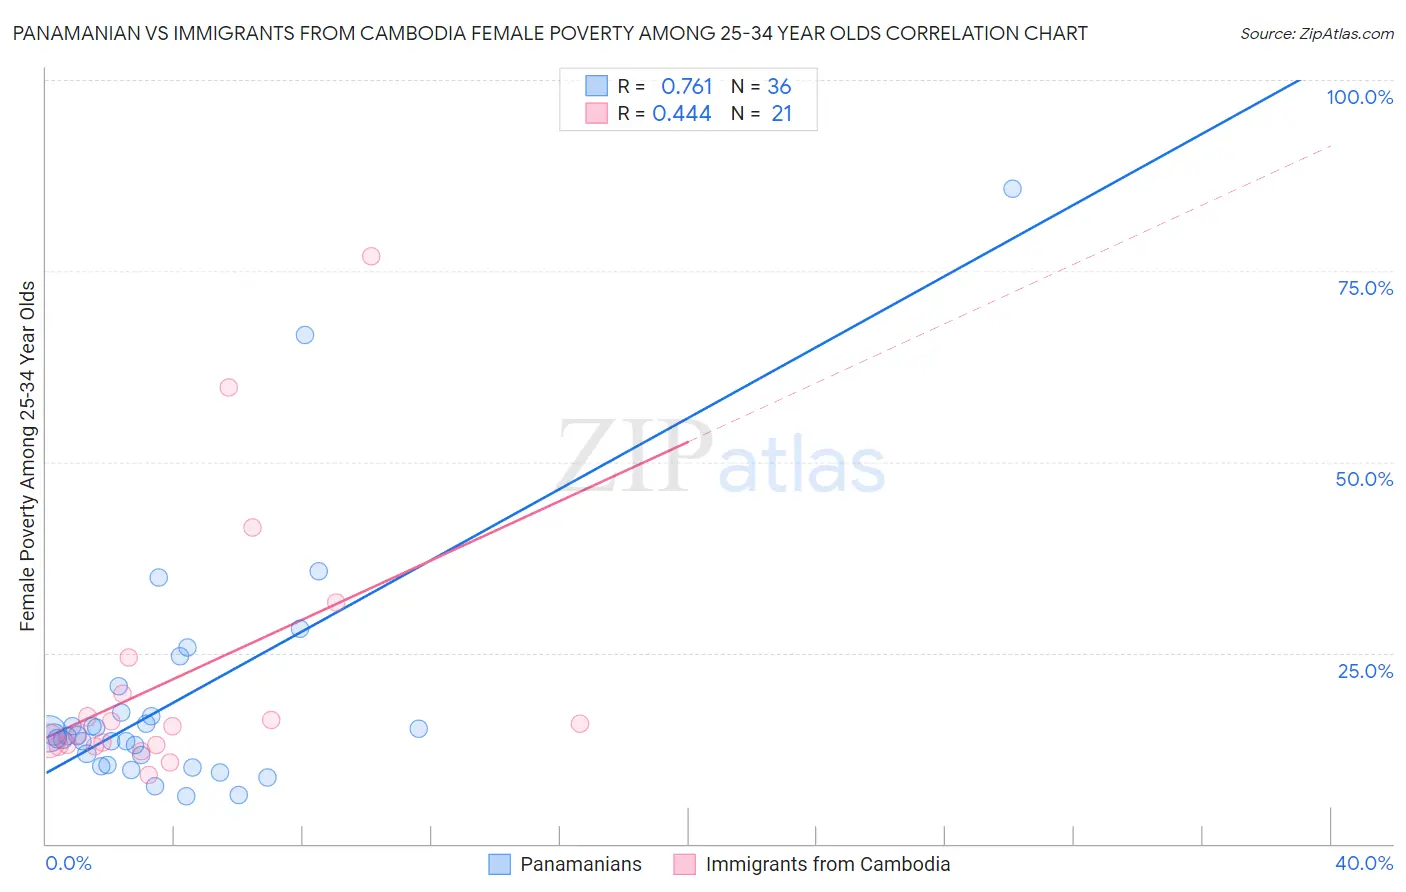 Panamanian vs Immigrants from Cambodia Female Poverty Among 25-34 Year Olds